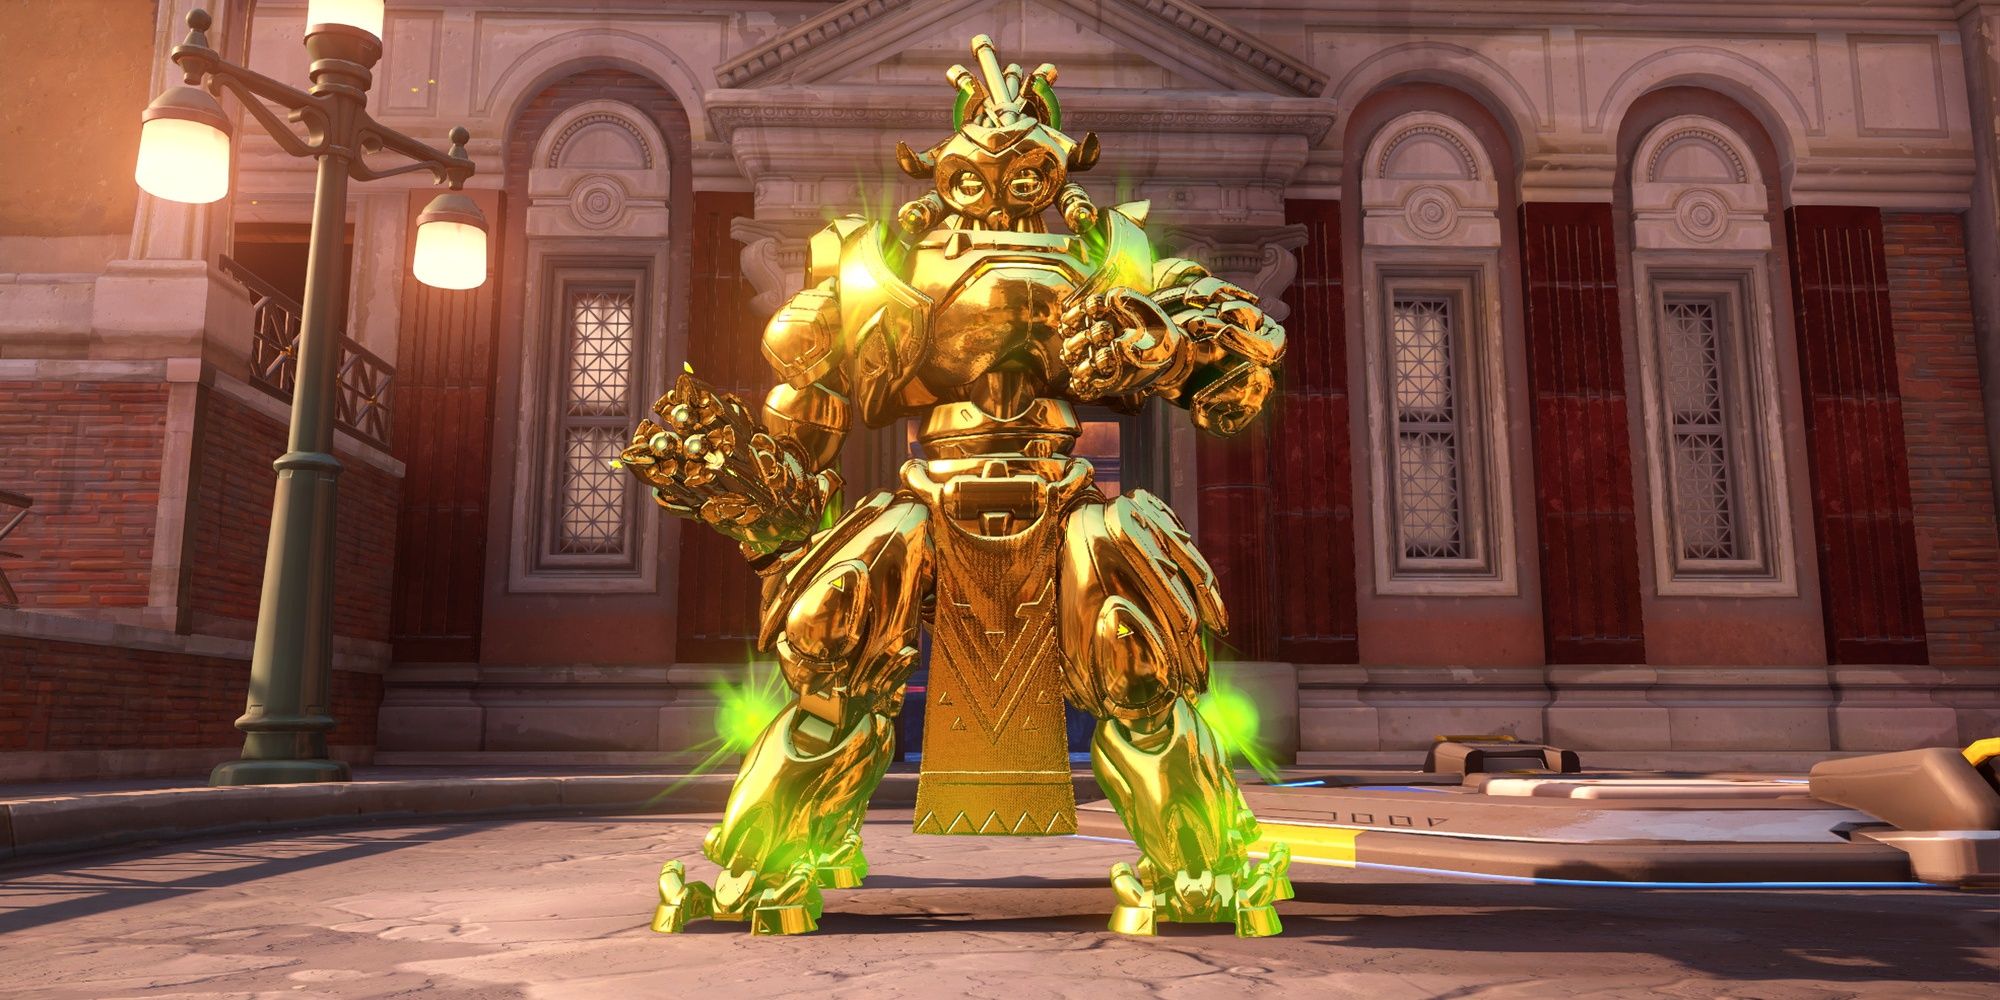 Orisa under the effects of her Fortify ability in Overwatch 2.